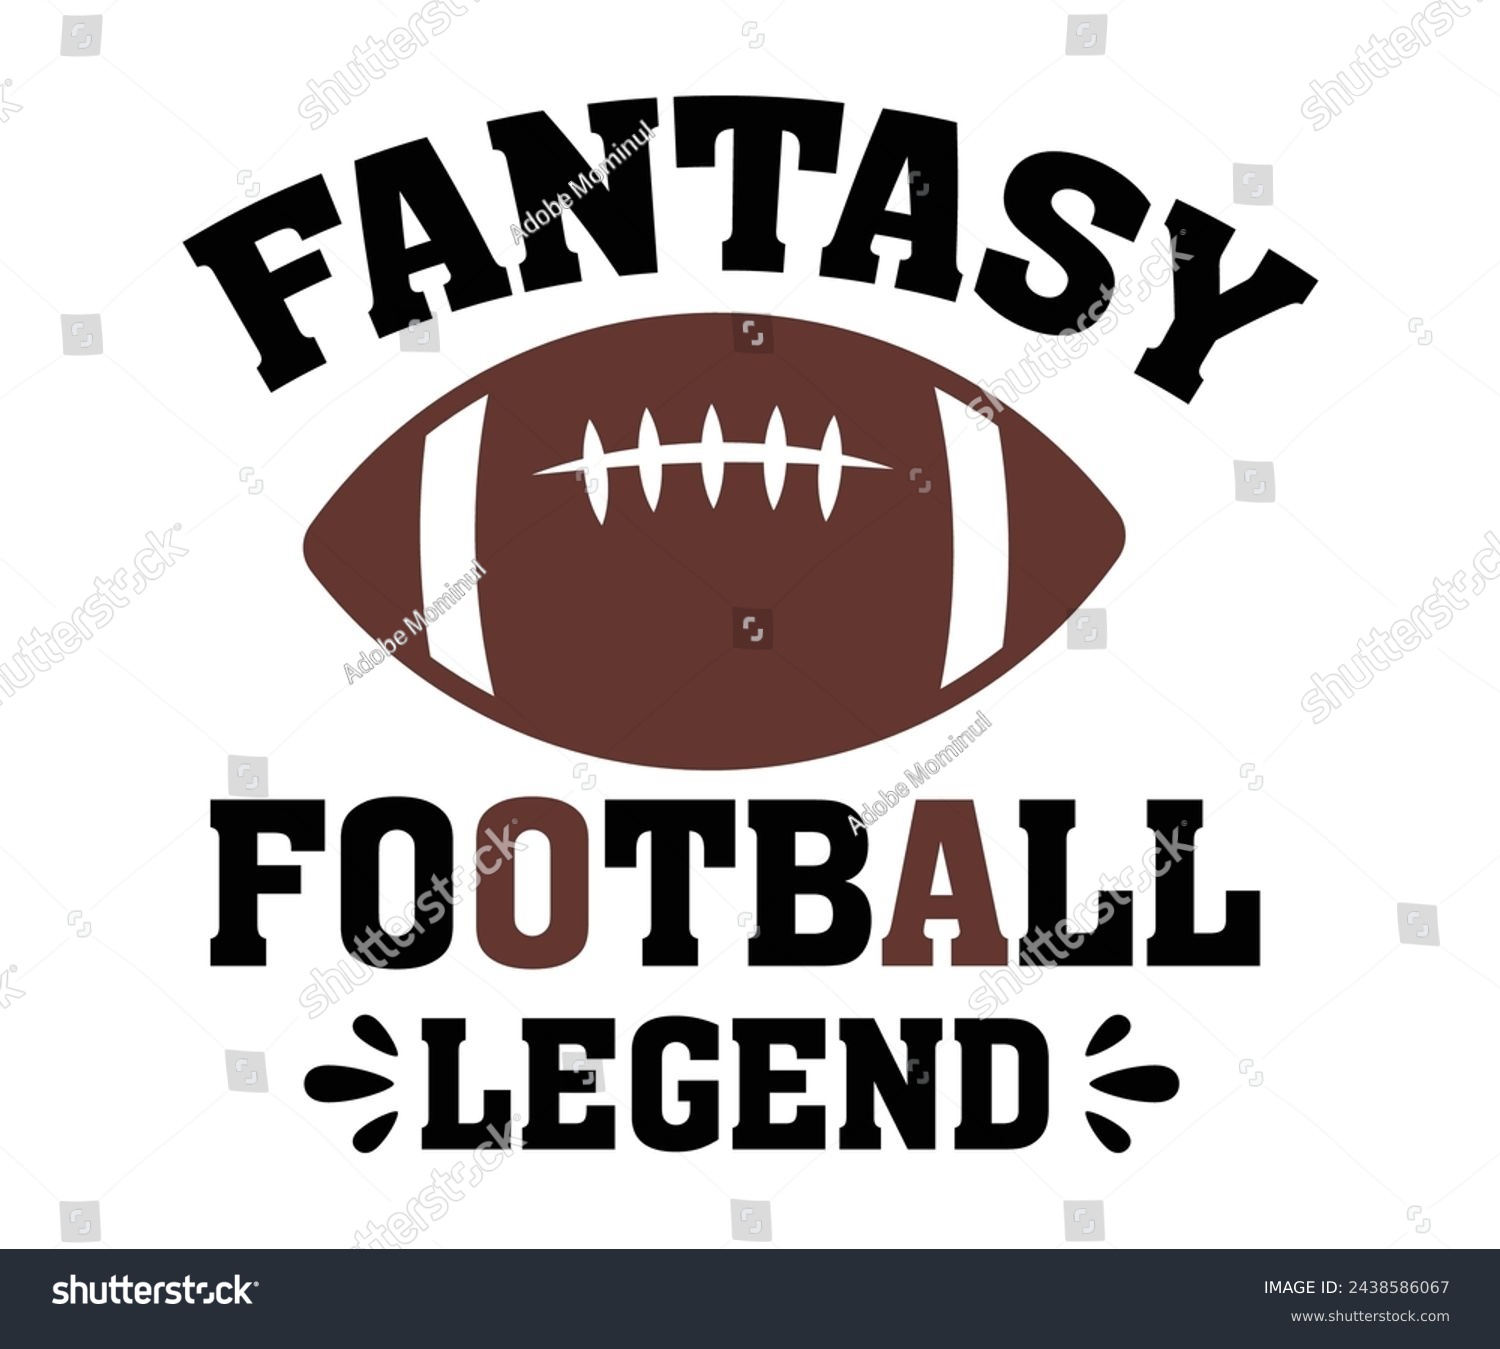 SVG of Fantasy Football Legend,Football Svg,Football Player Svg,Game Day Shirt,Football Quotes Svg,American Football Svg,Soccer Svg,Cut File,Commercial use svg